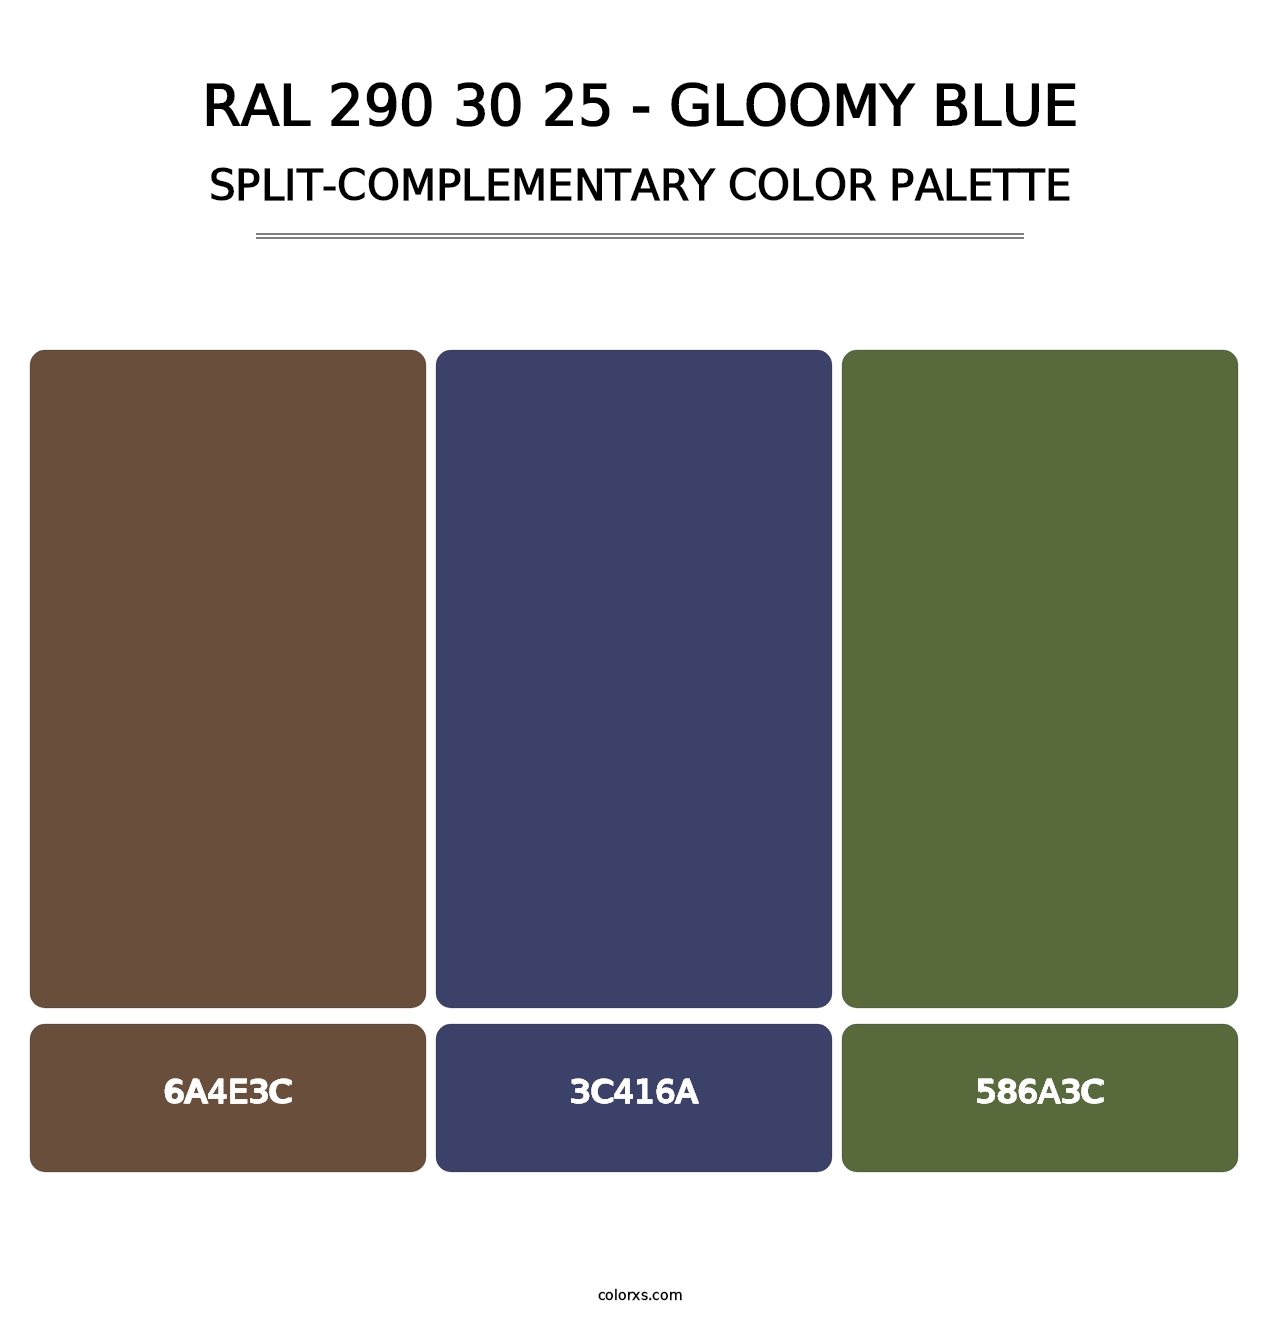 RAL 290 30 25 - Gloomy Blue - Split-Complementary Color Palette